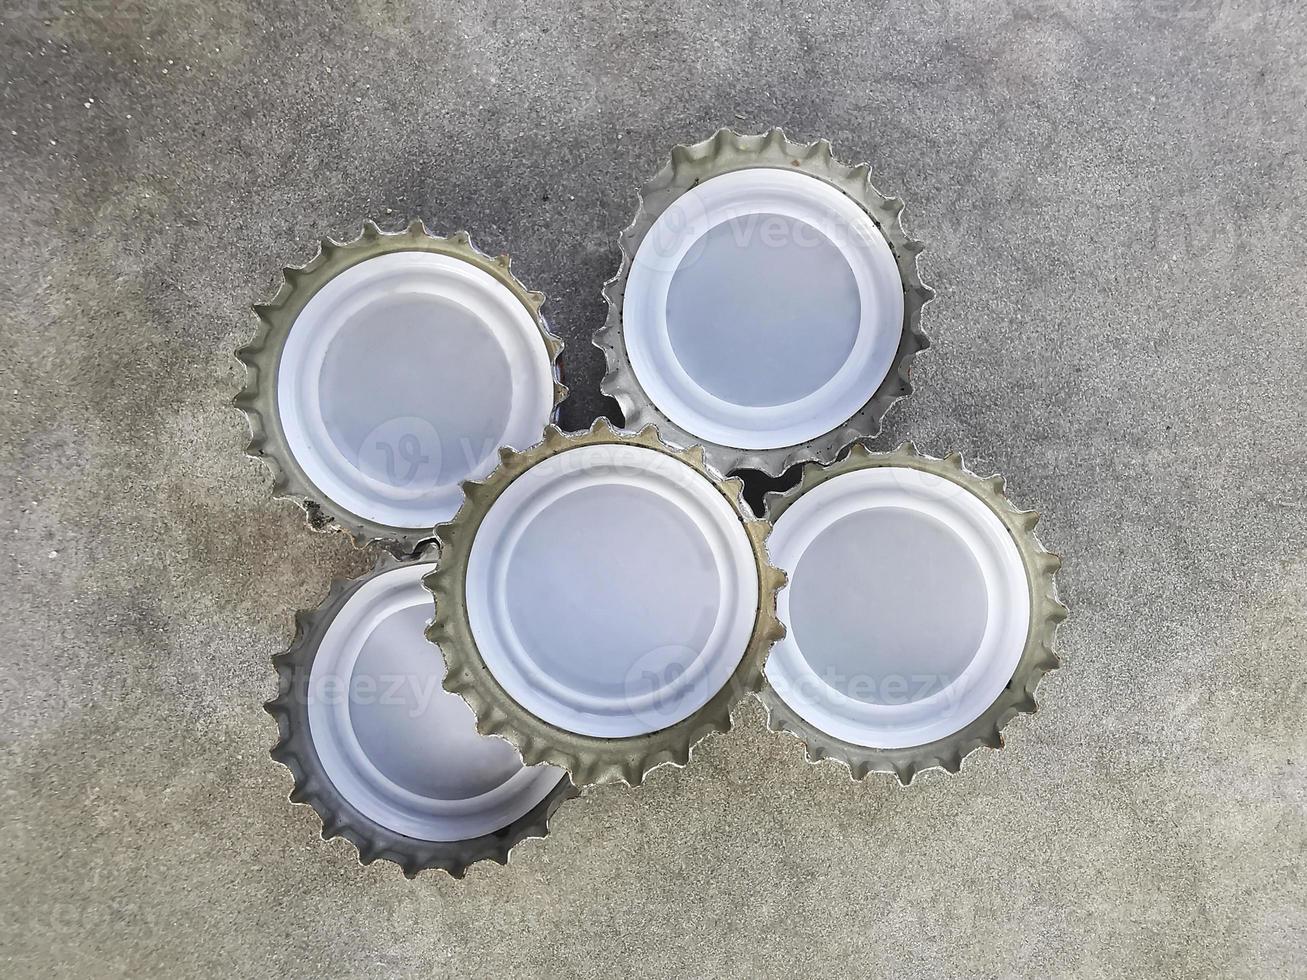 Soft drink bottle cap isolated on cement floor photo